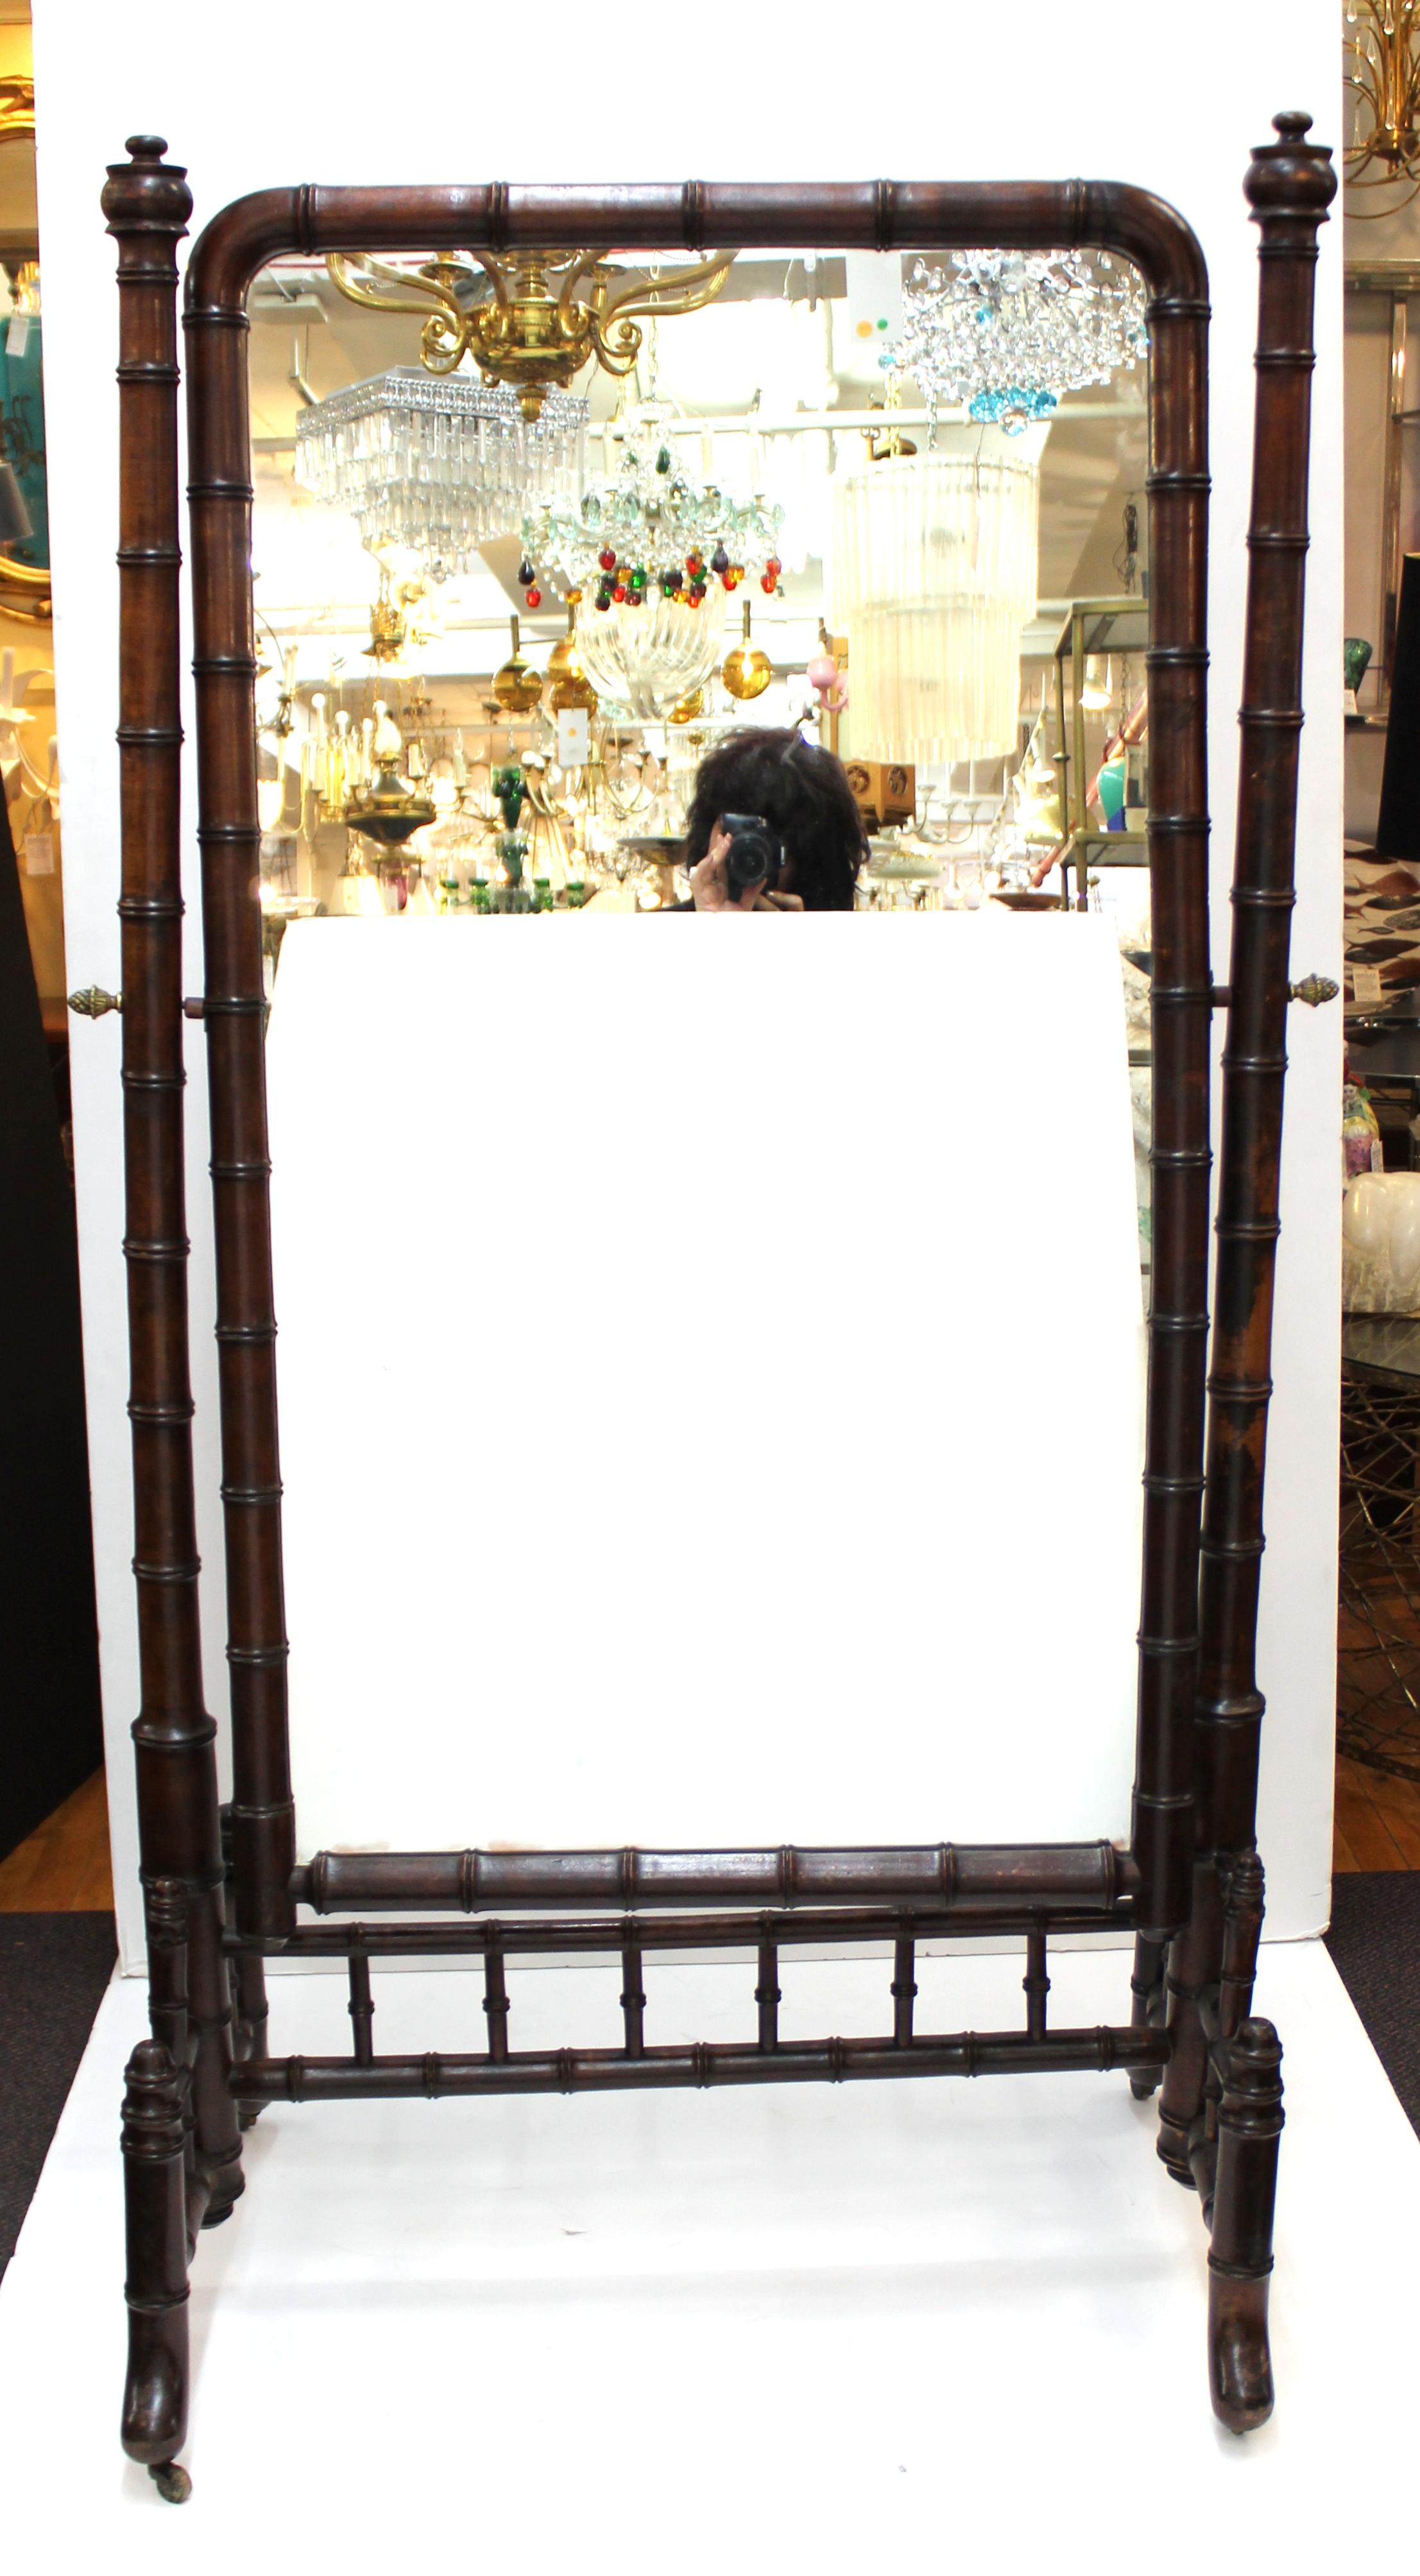 French 19th century Victorian faux bamboo cheval mirror in mahogany. The piece has pineapple finials holding up the mirror panel and moves on brass casters. Made in the circa 1880s in France. In great vintage condition with age-appropriate wear.